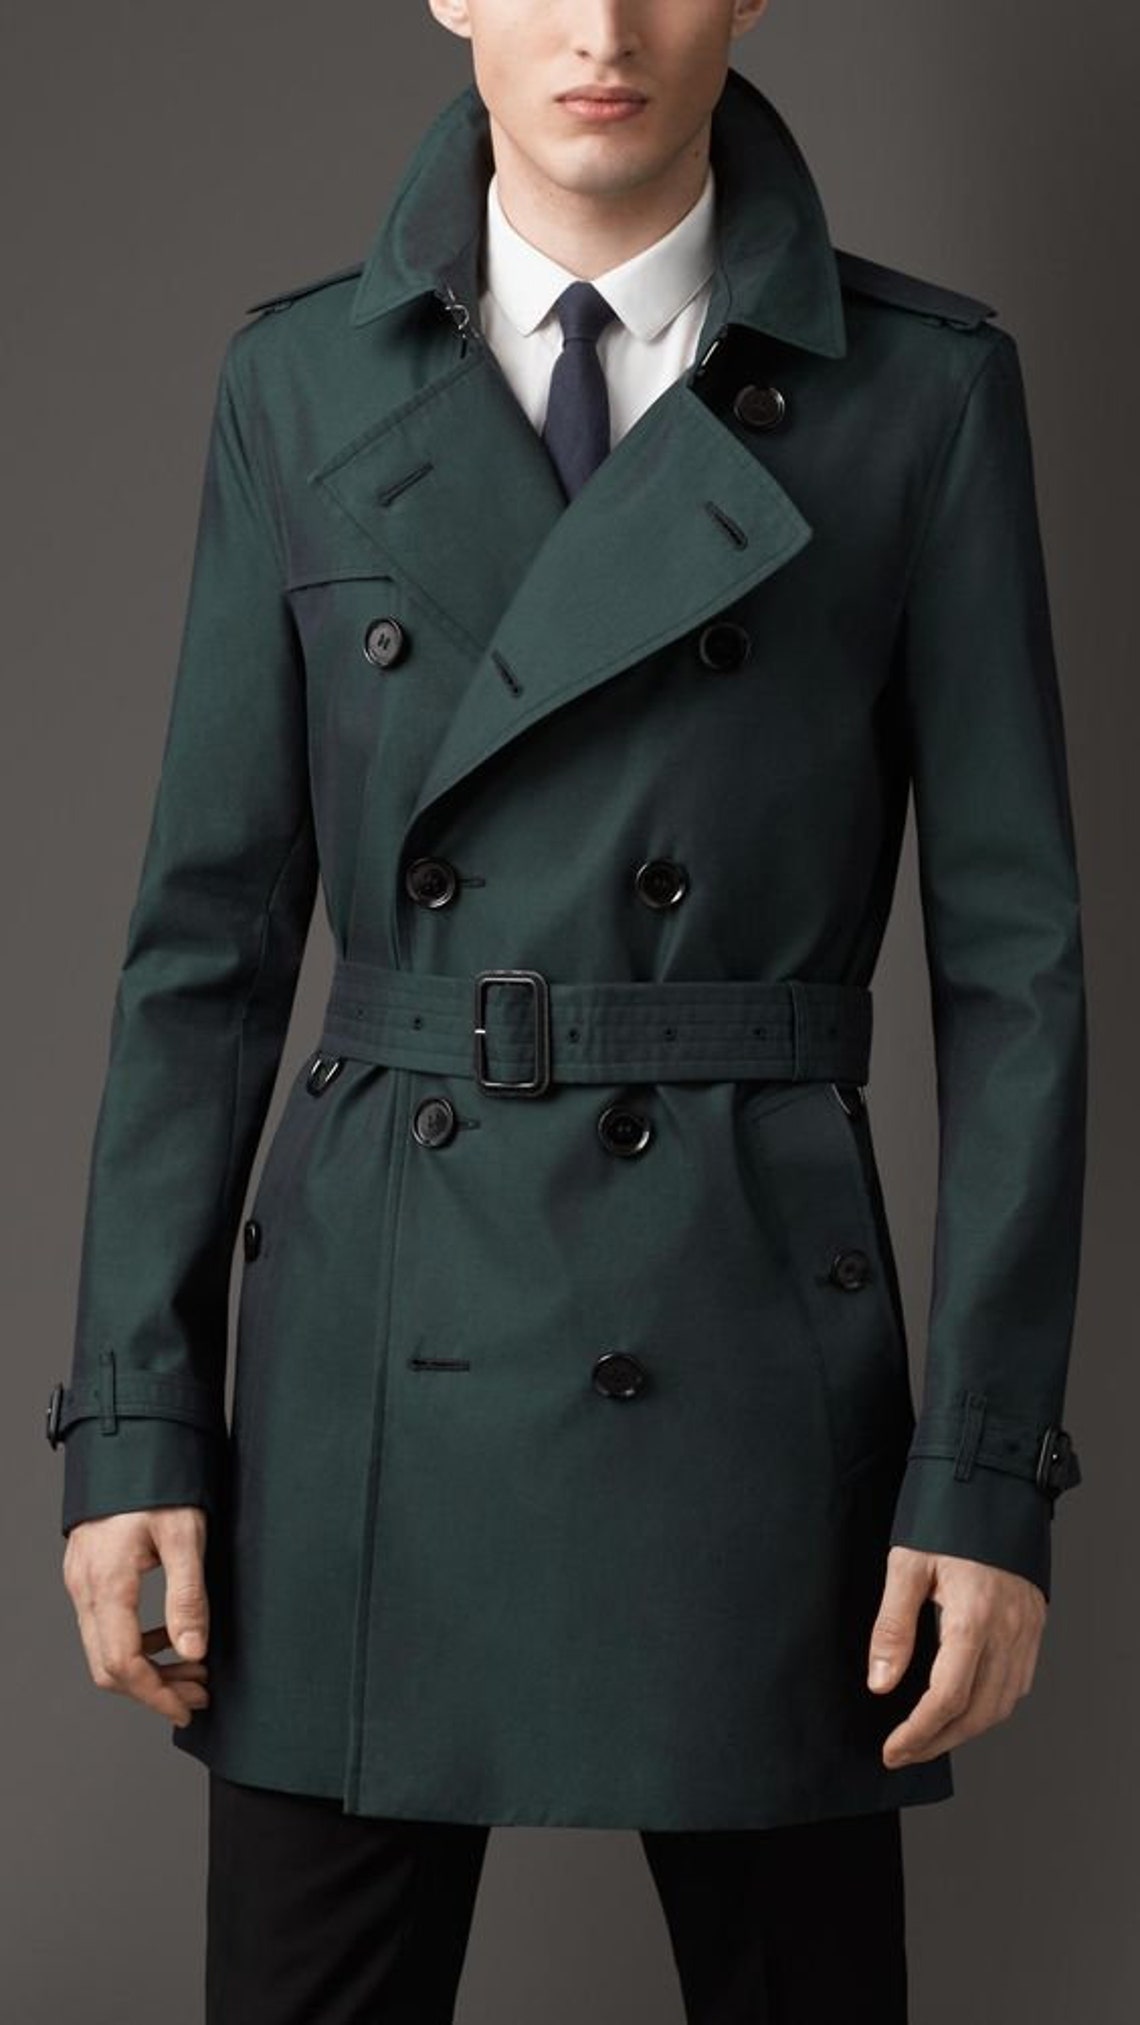 Men Trench Coat Green Belted Double Breasted Style Slim Fit - Etsy